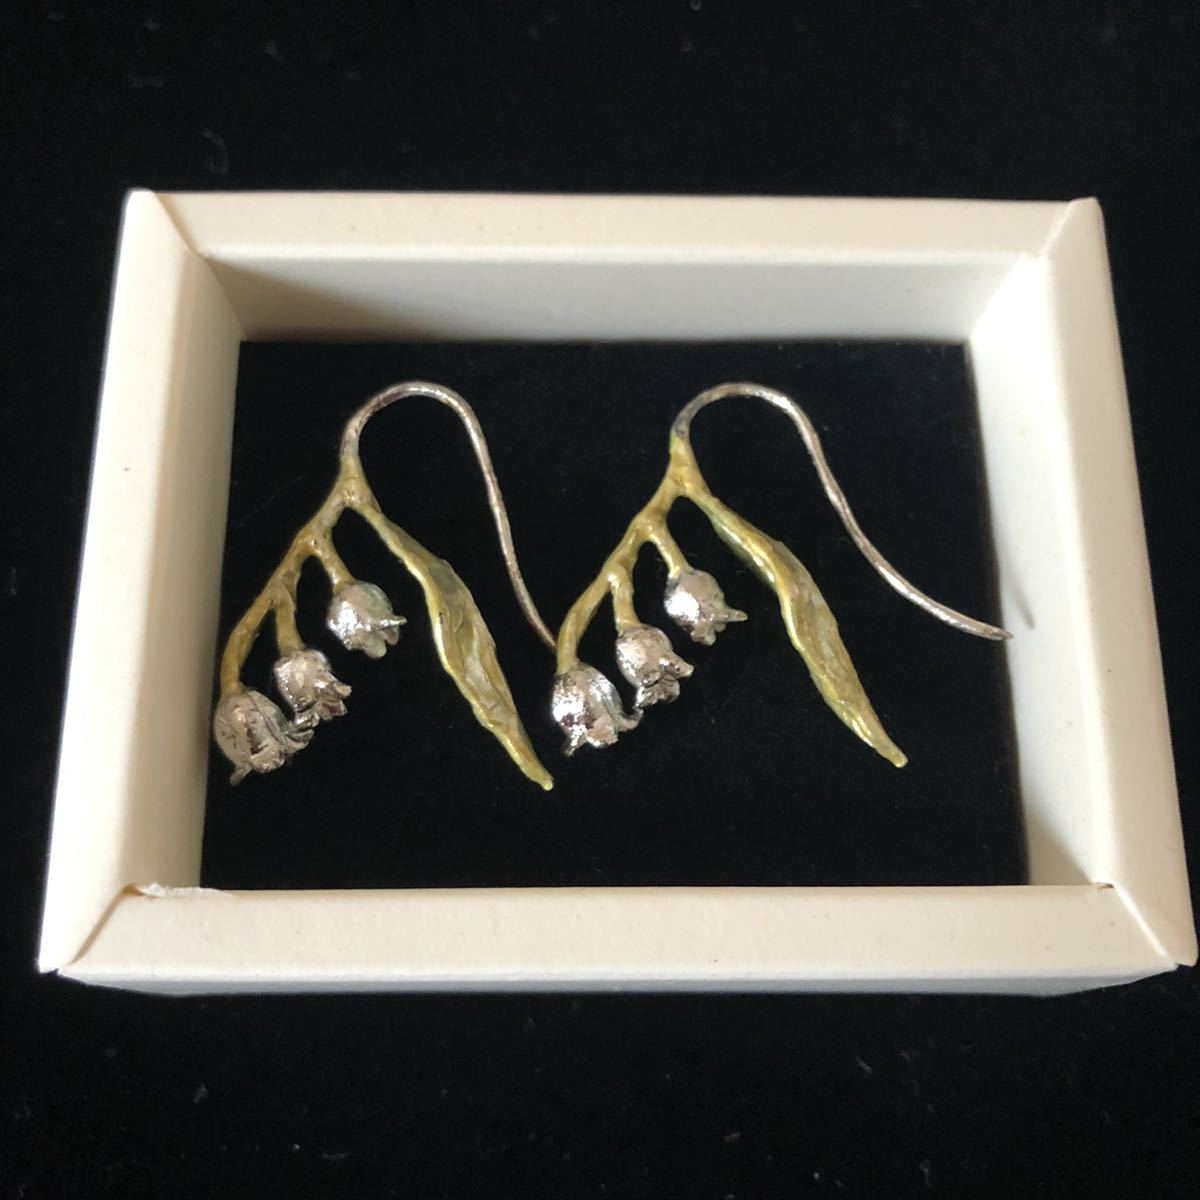 Palnart Poc earrings .... lily of the valley bell orchid Brough Superior/b rough shoe pe rear color : silver hook earrings 